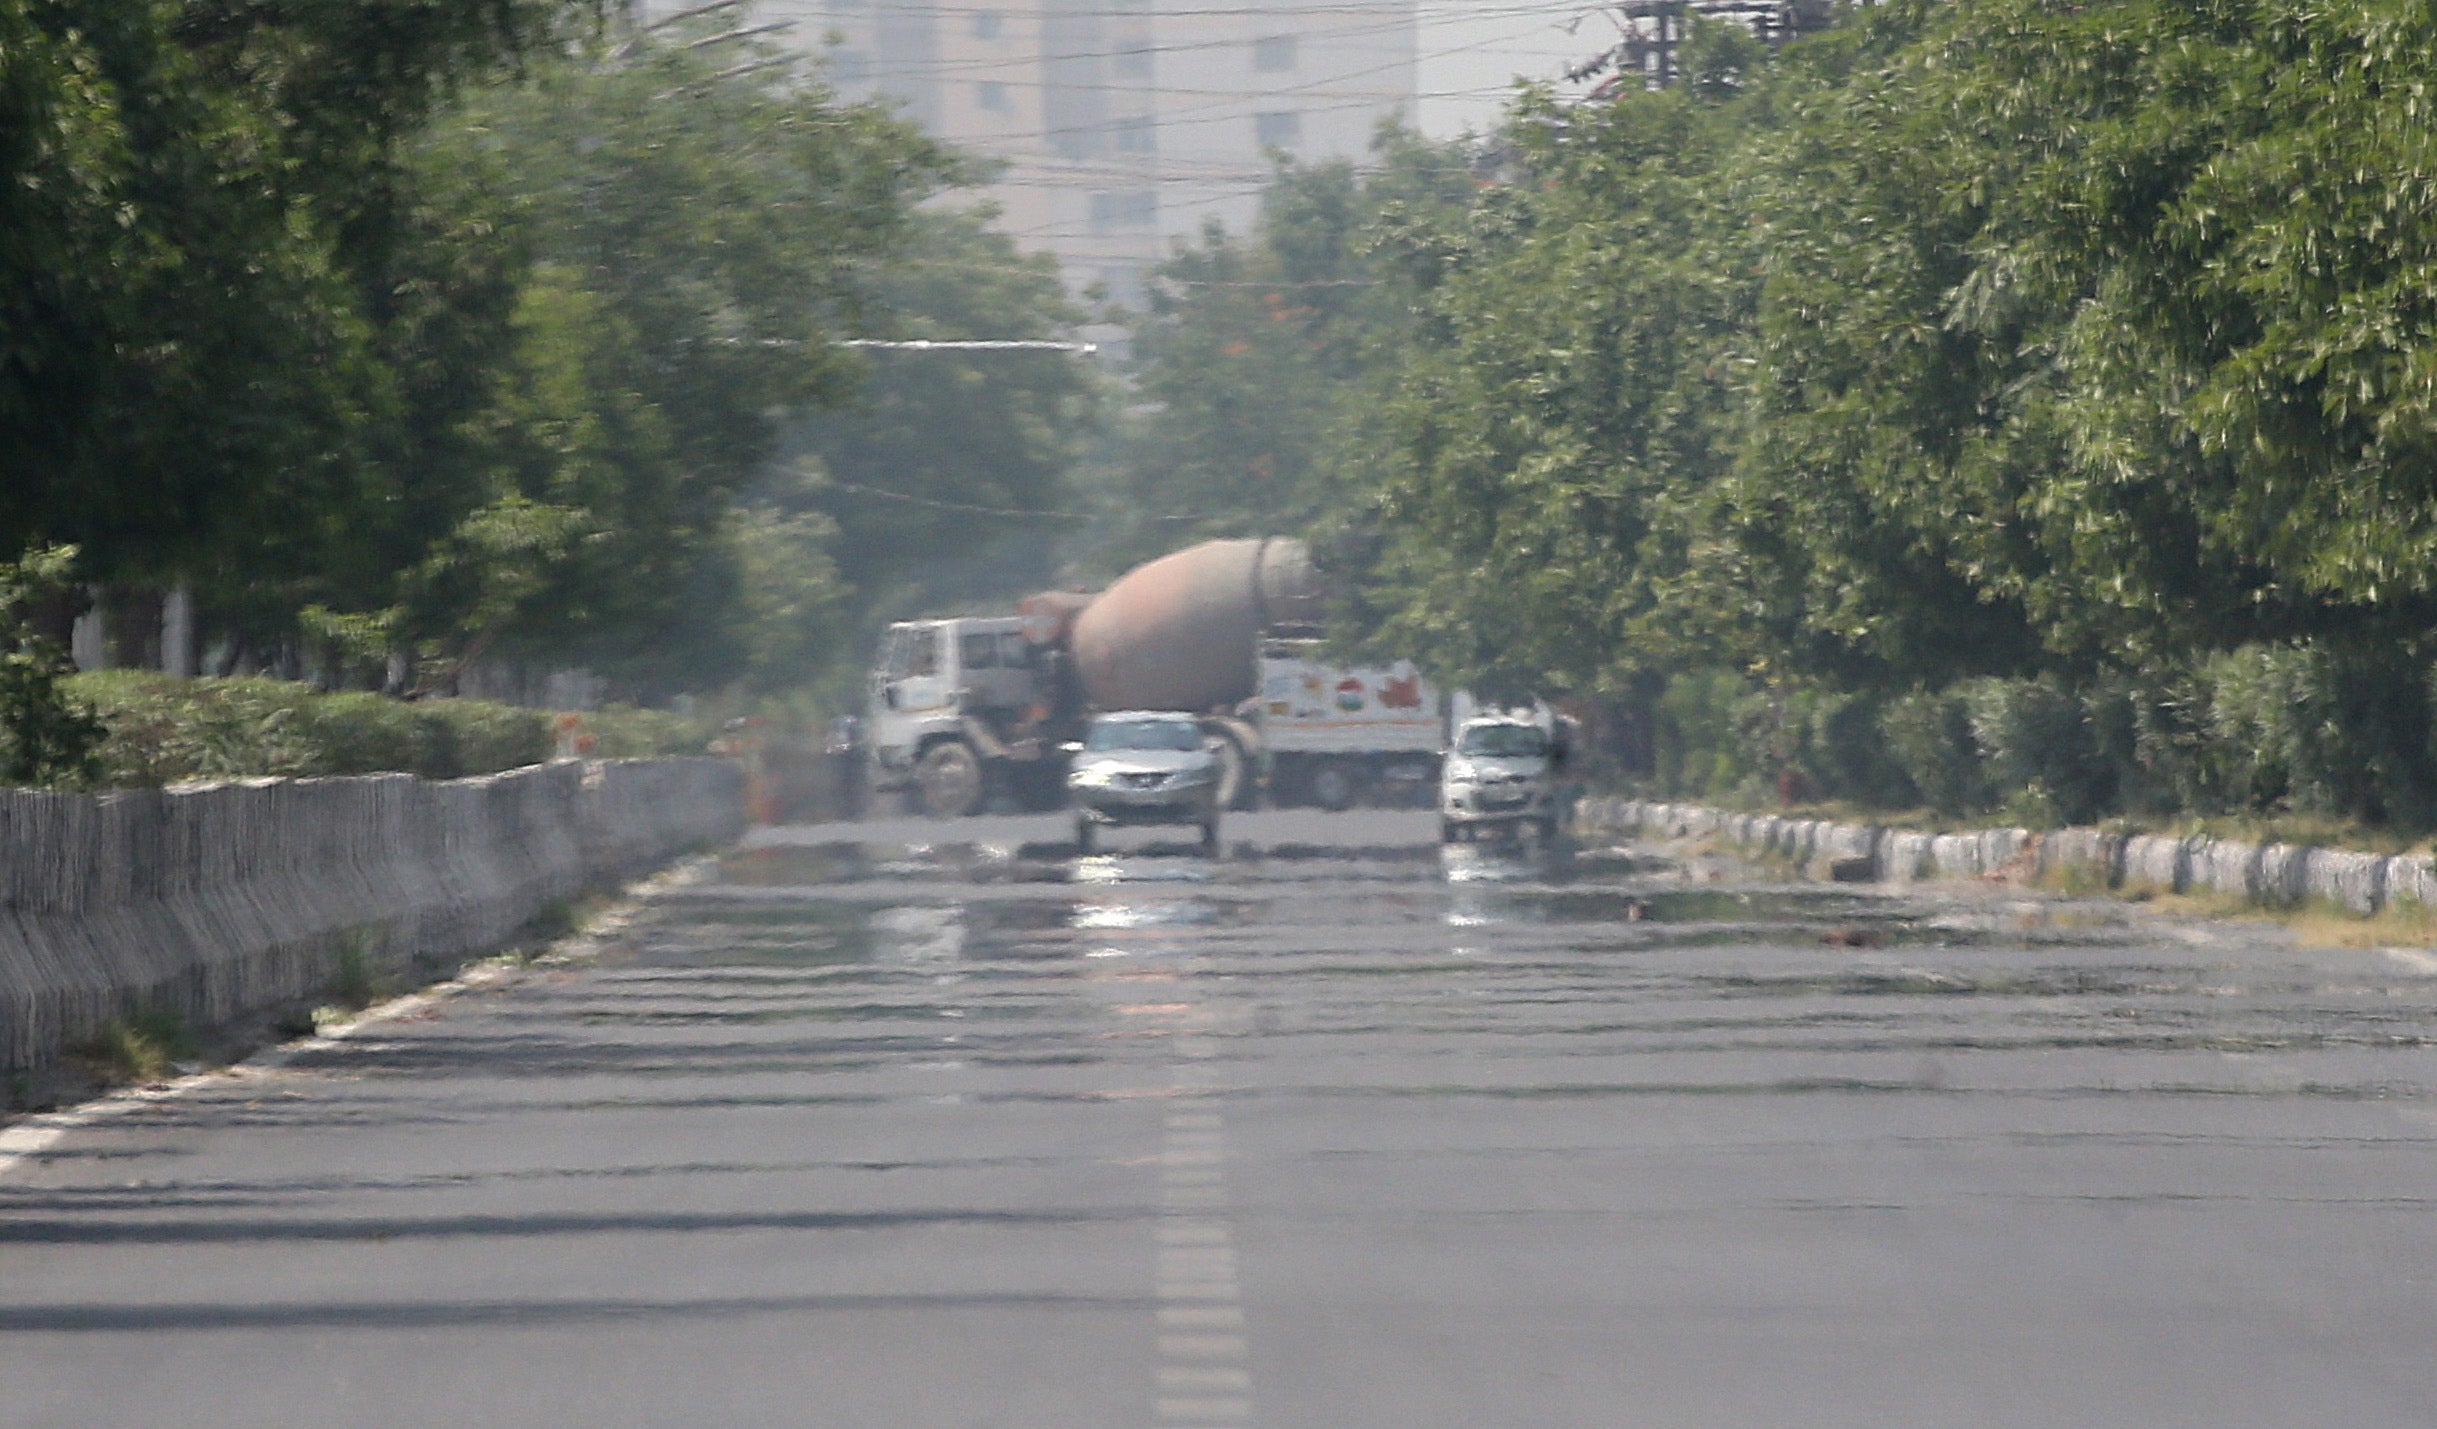 View of heat haze occurring on the surface of road near New Delhi, India on 28 April 2022